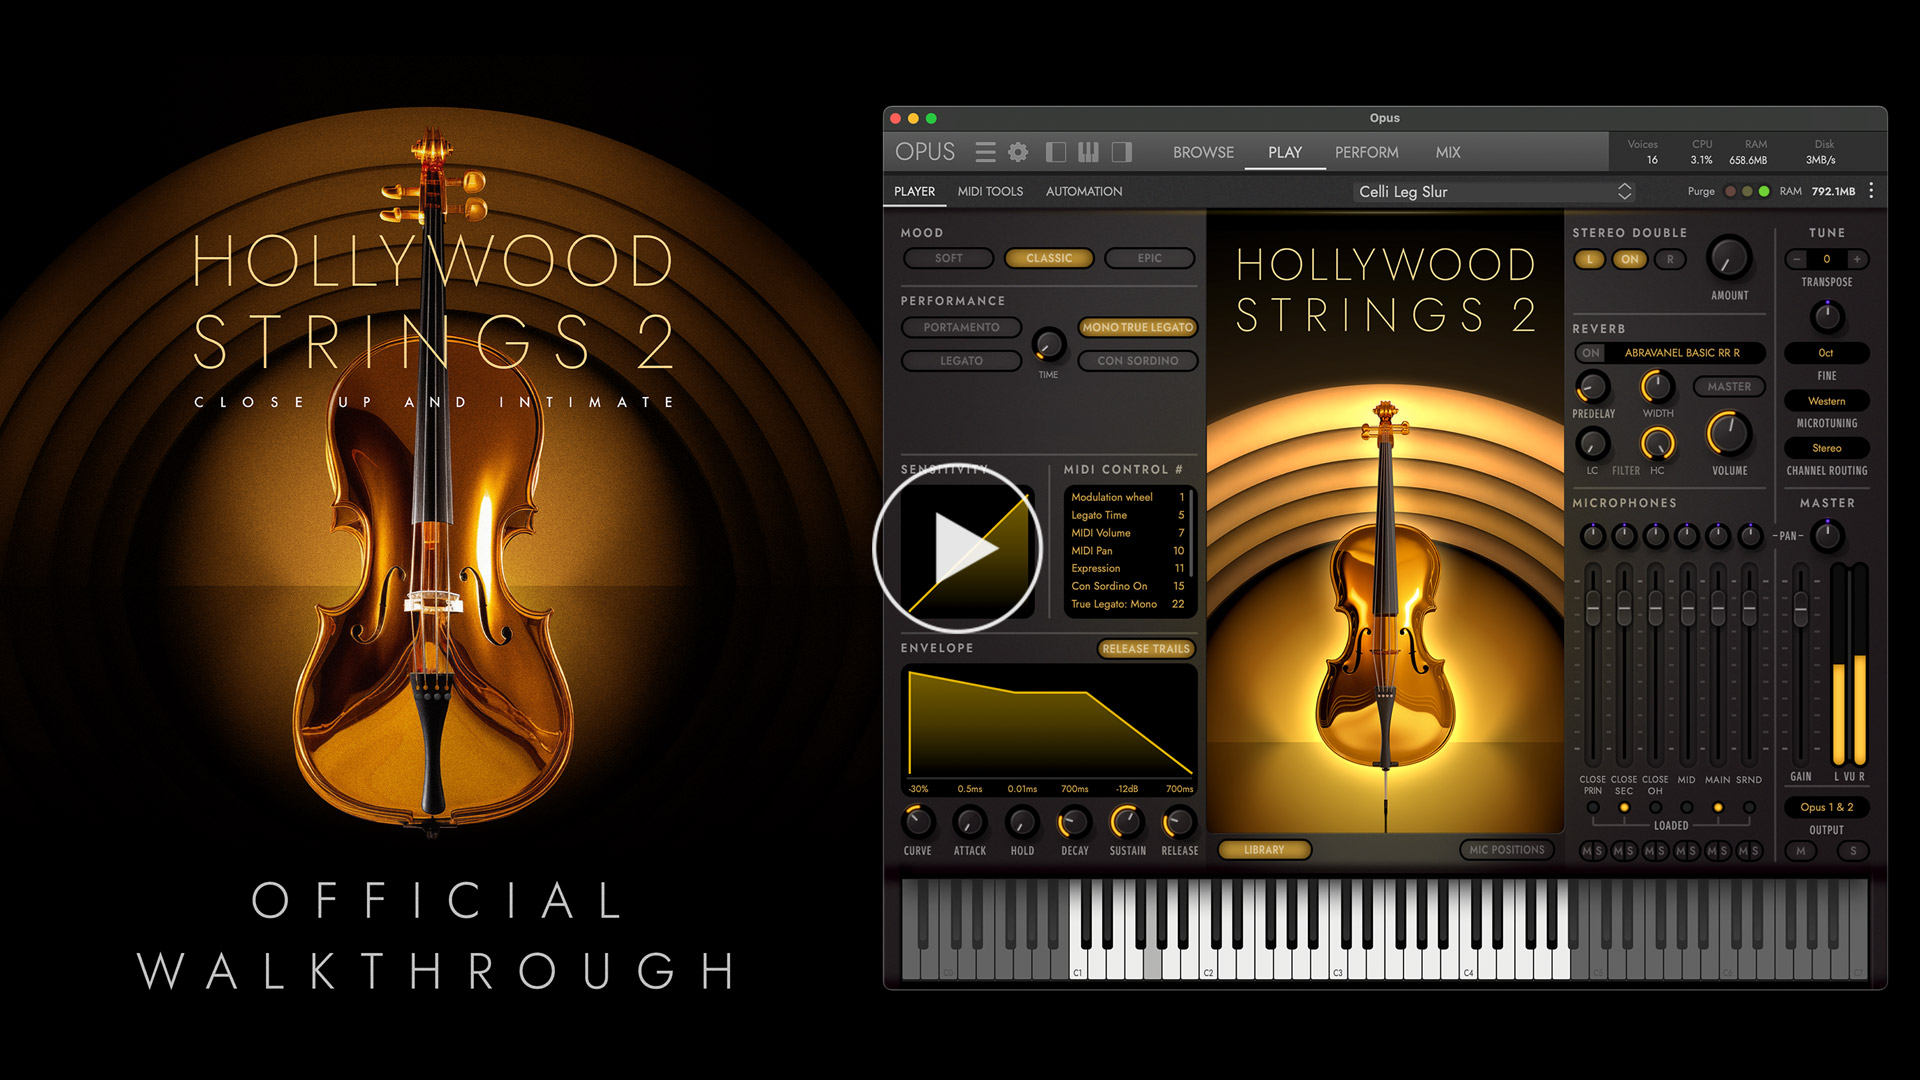 Watch the official Hollywood Strings 2 Walkthrough